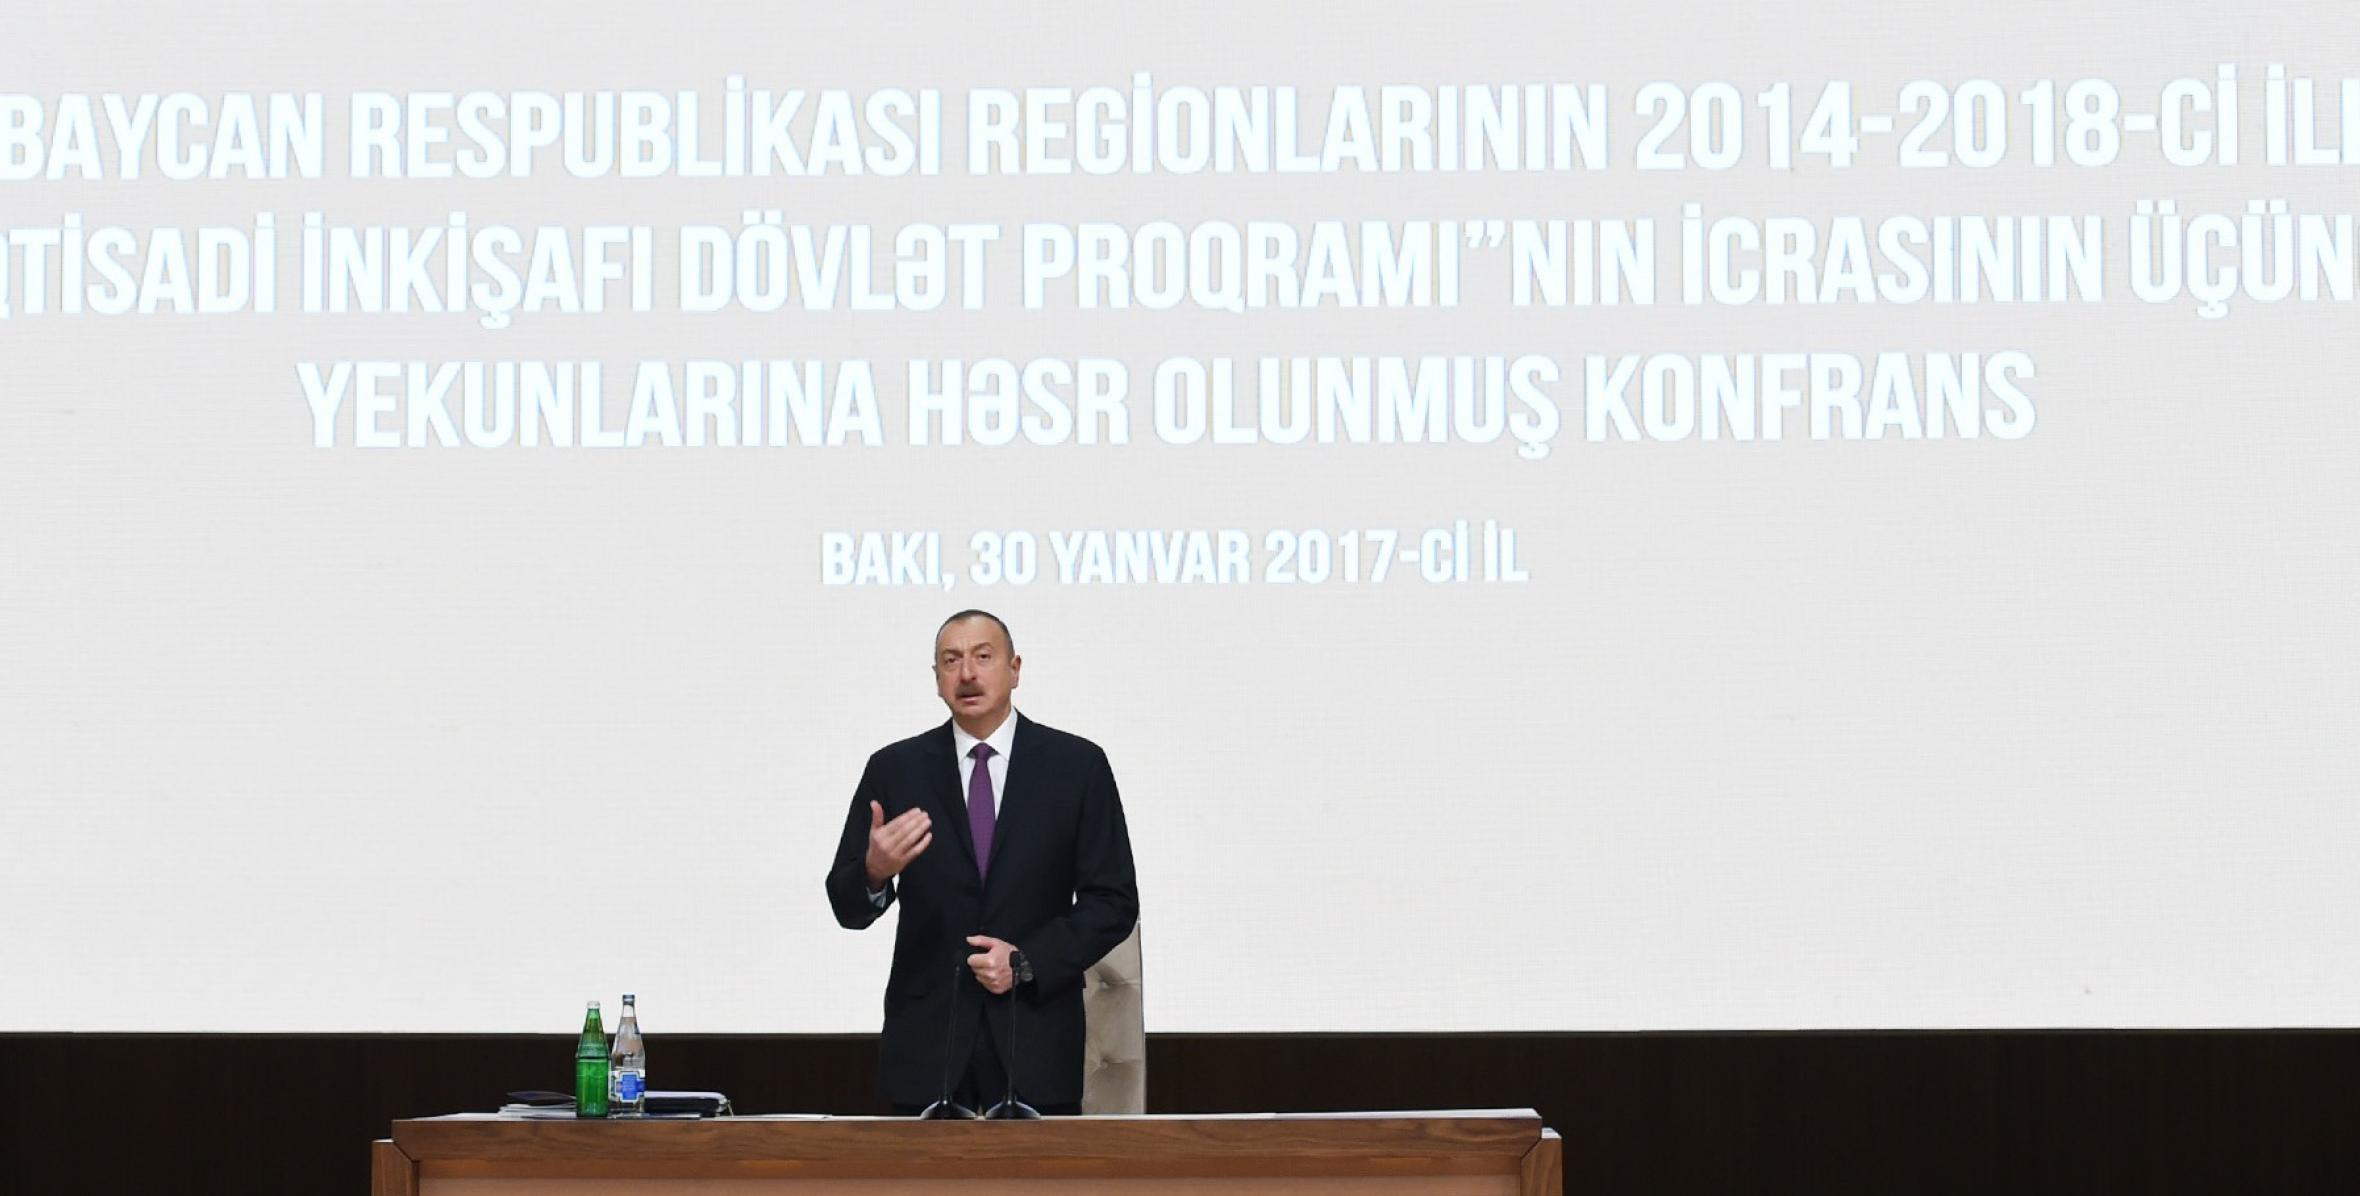 Opening speech by Ilham Aliyev at the conference dedicated to results of third year implementation of the State Program on socio-economic development in 2014-2018